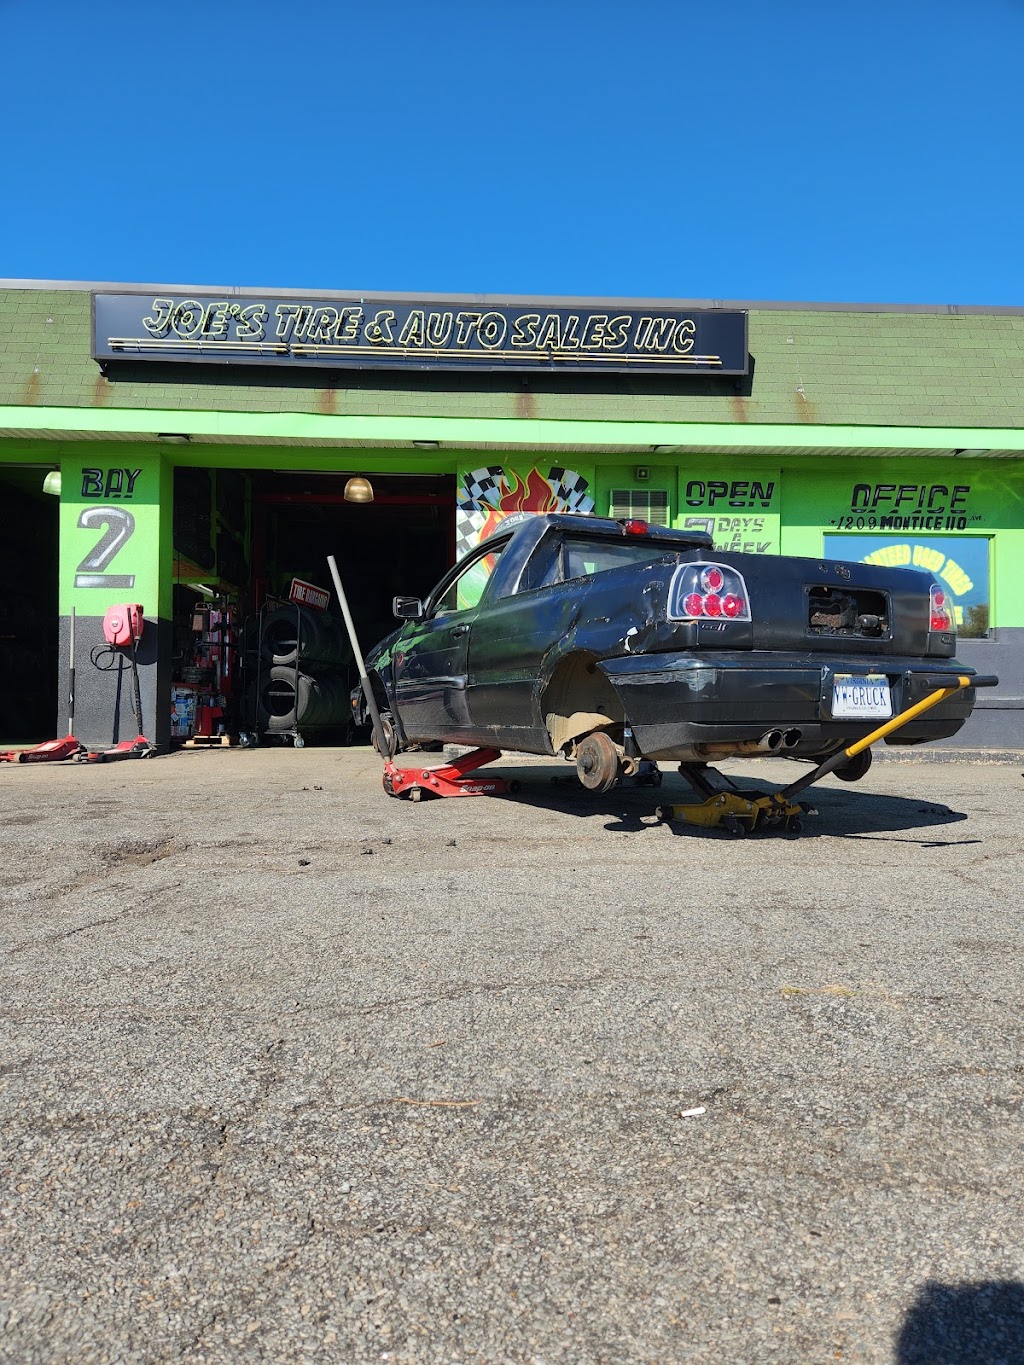 Joes Used Tires | 1209 Monticello Ave, Norfolk, VA 23510 | Phone: (757) 624-8473